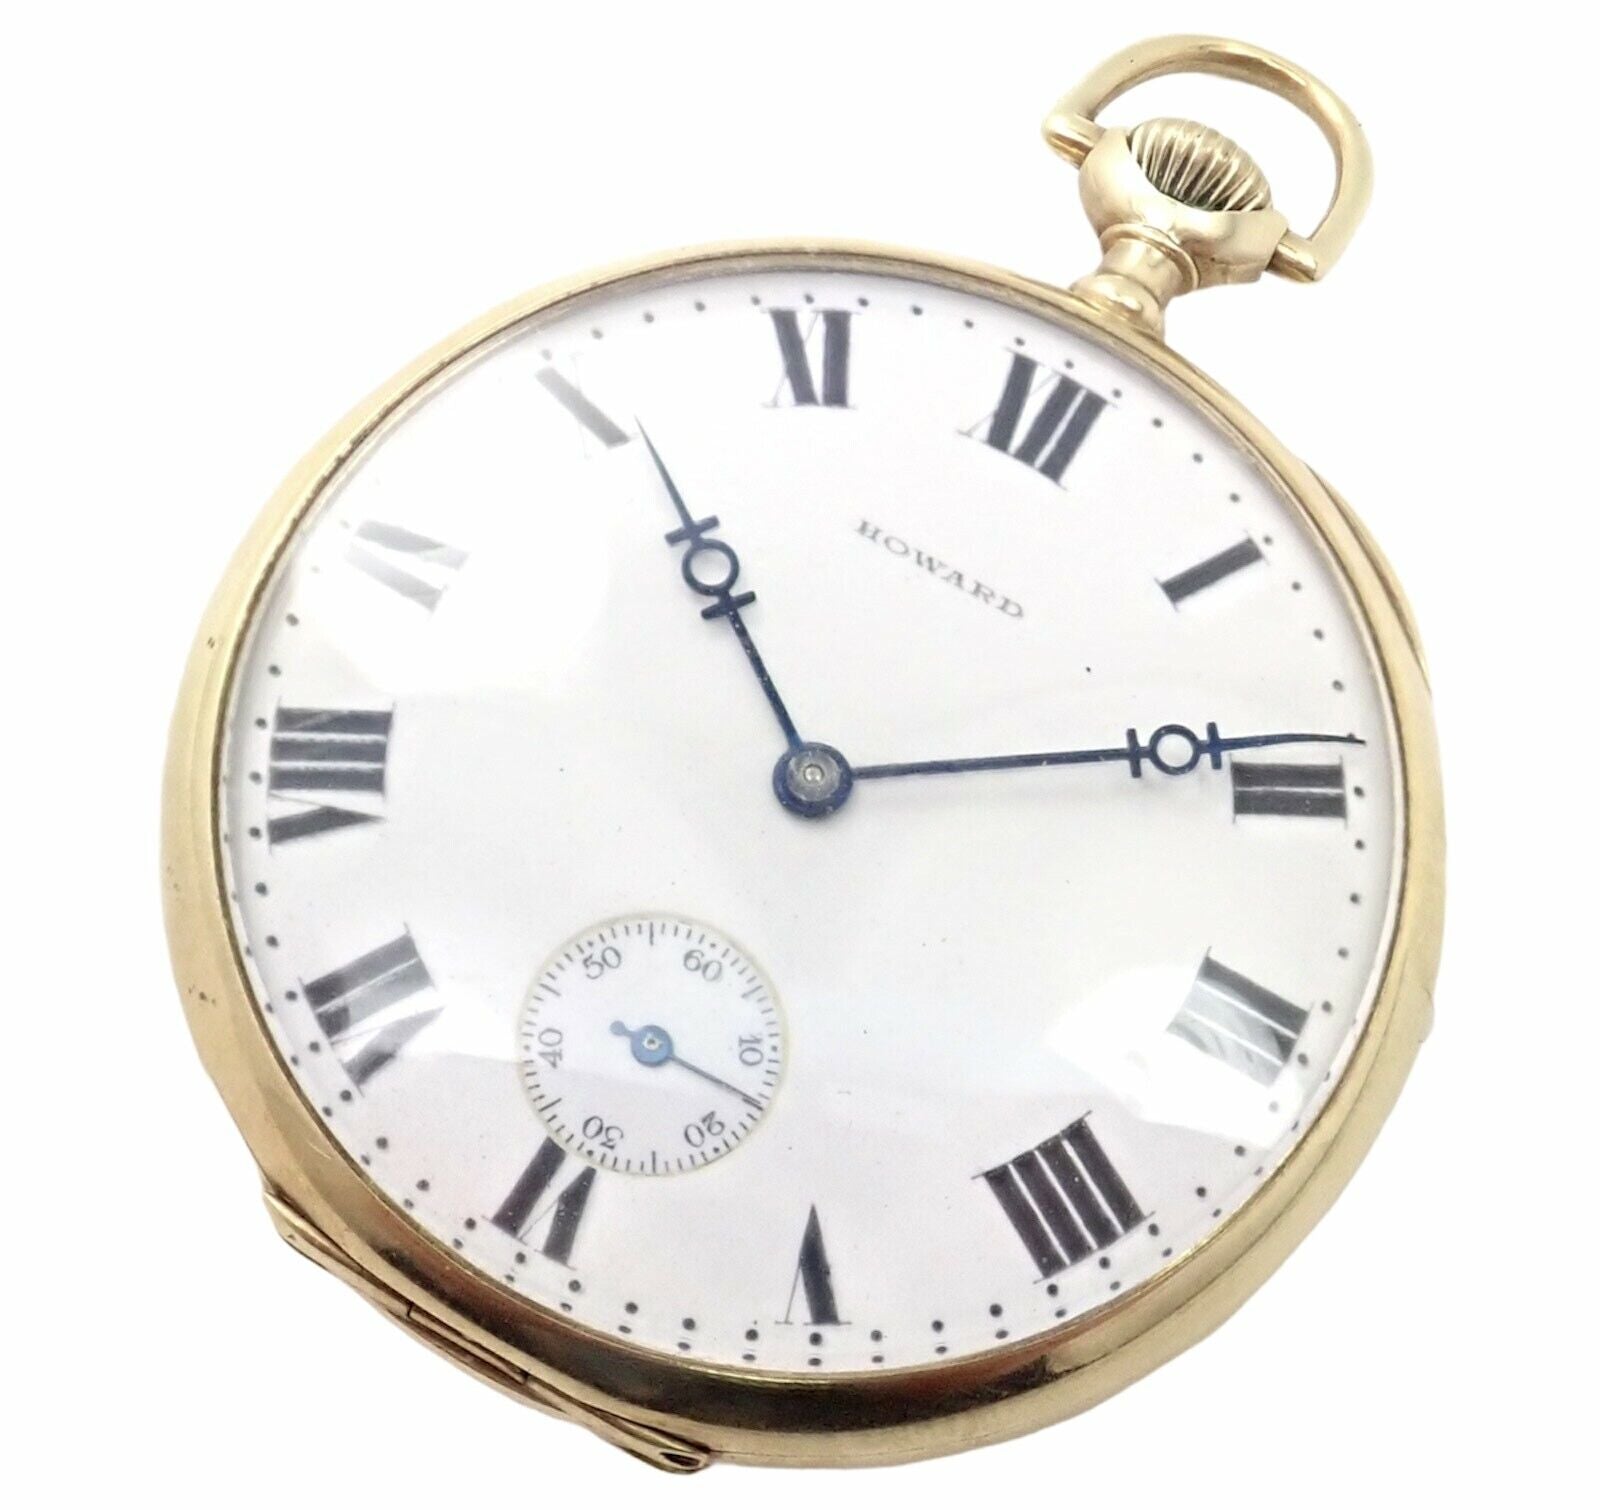 Howard Jewelry & Watches:Watches, Parts & Accessories:Watches:Pocket Watches Vintage Howard 14k Yellow Gold 46mm 17j Pocket Watch c. 1920's